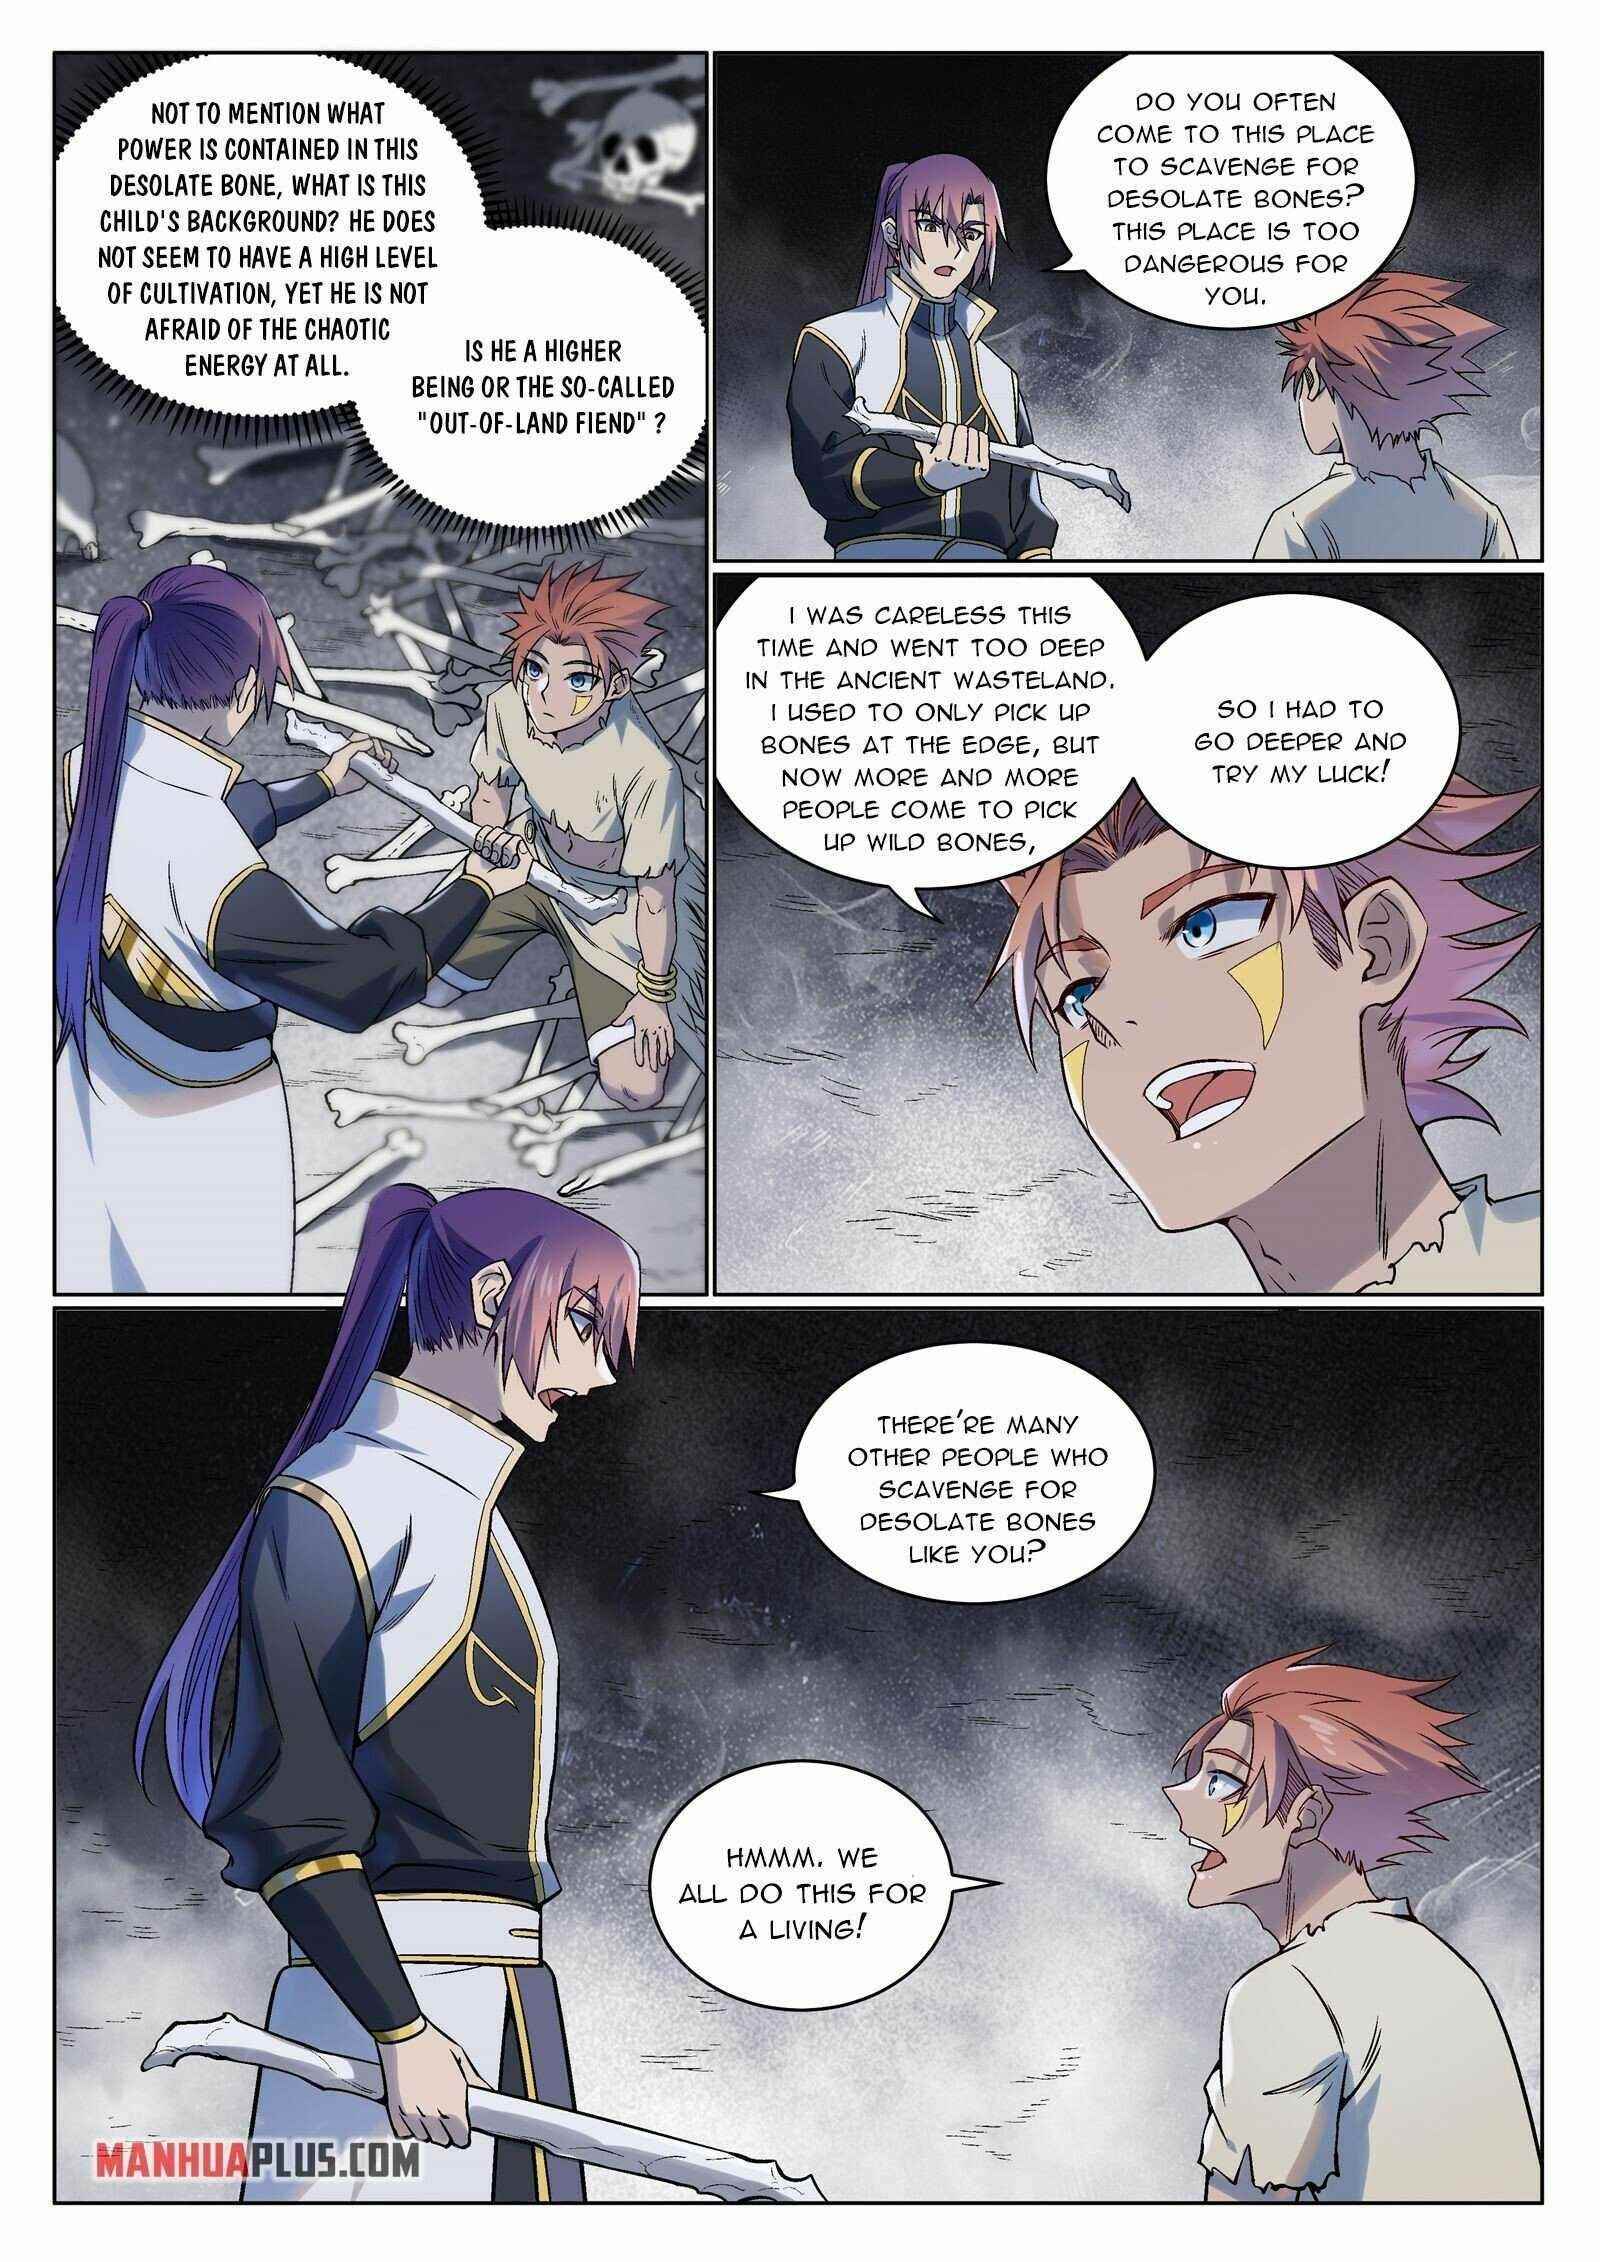 APOTHEOSIS Chapter 984 - Page 4